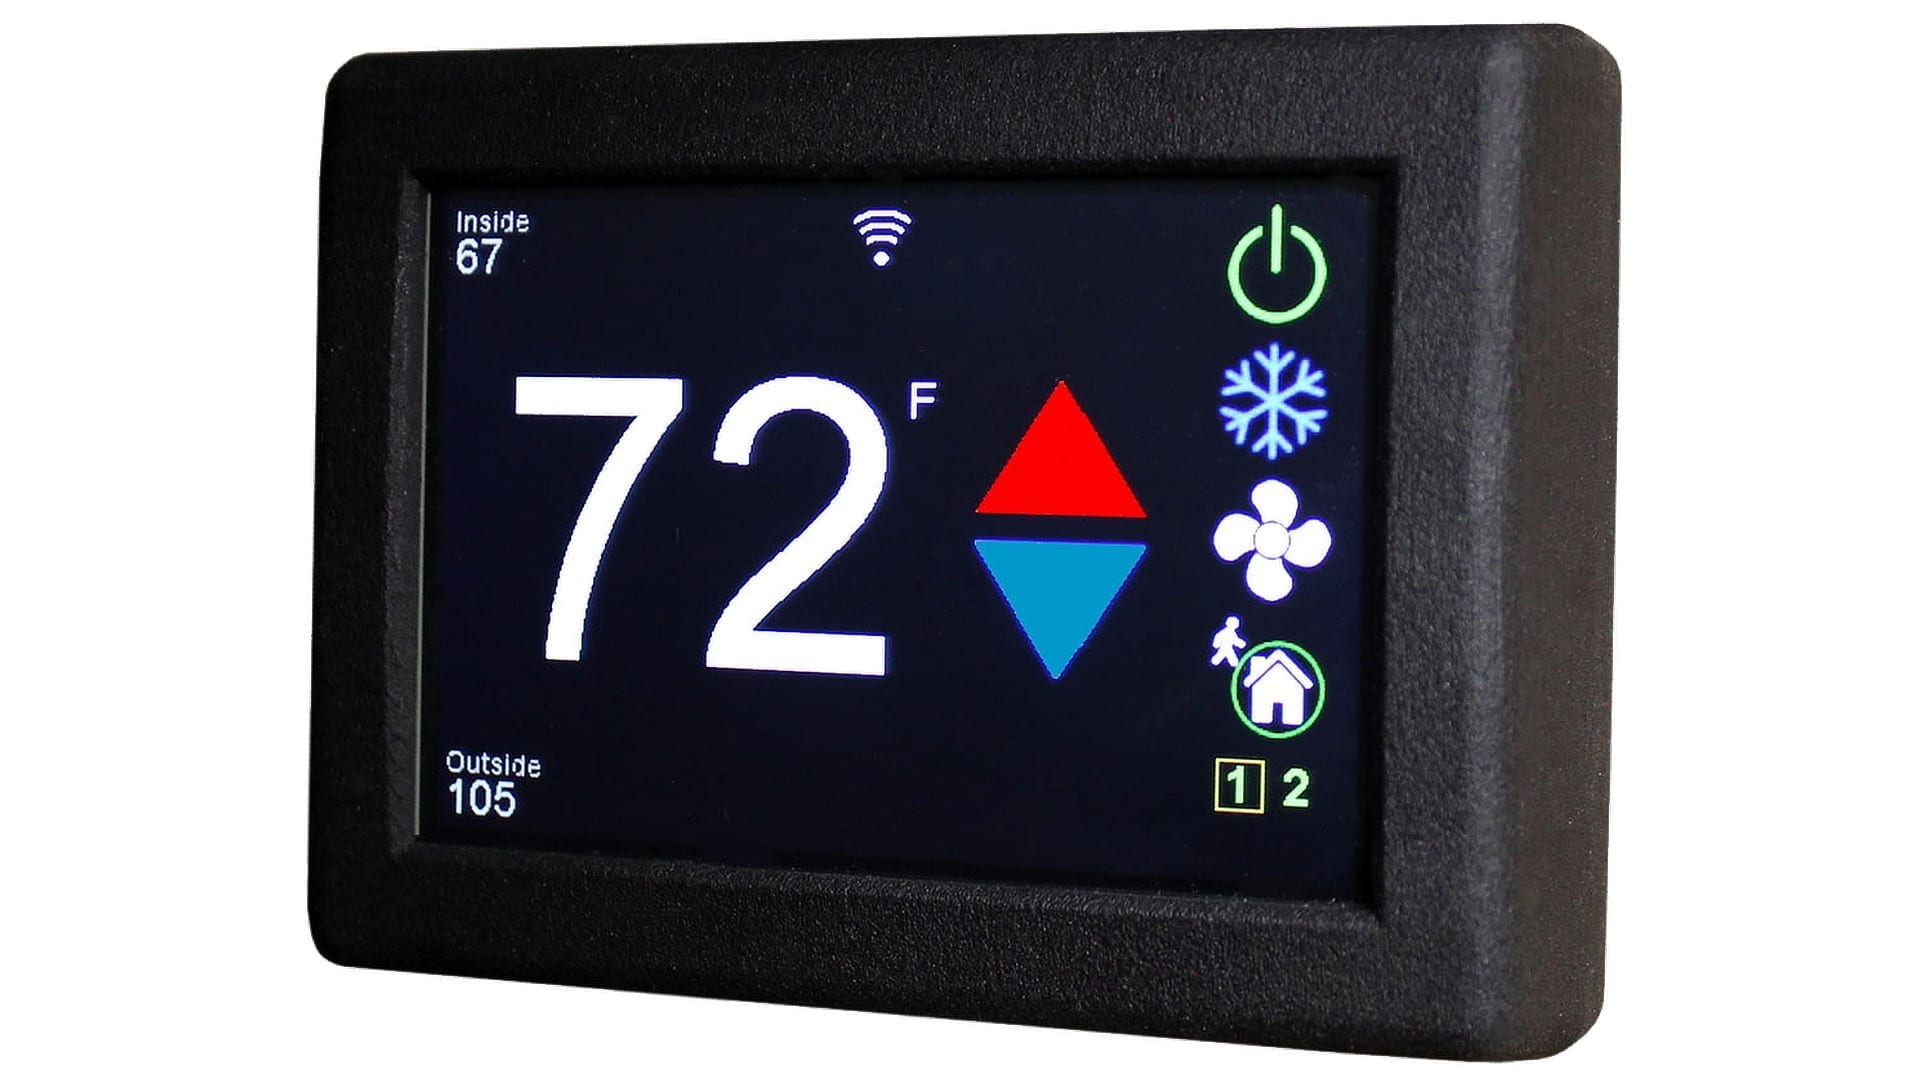 The Micro-Air EasyTouch RV Thermostat